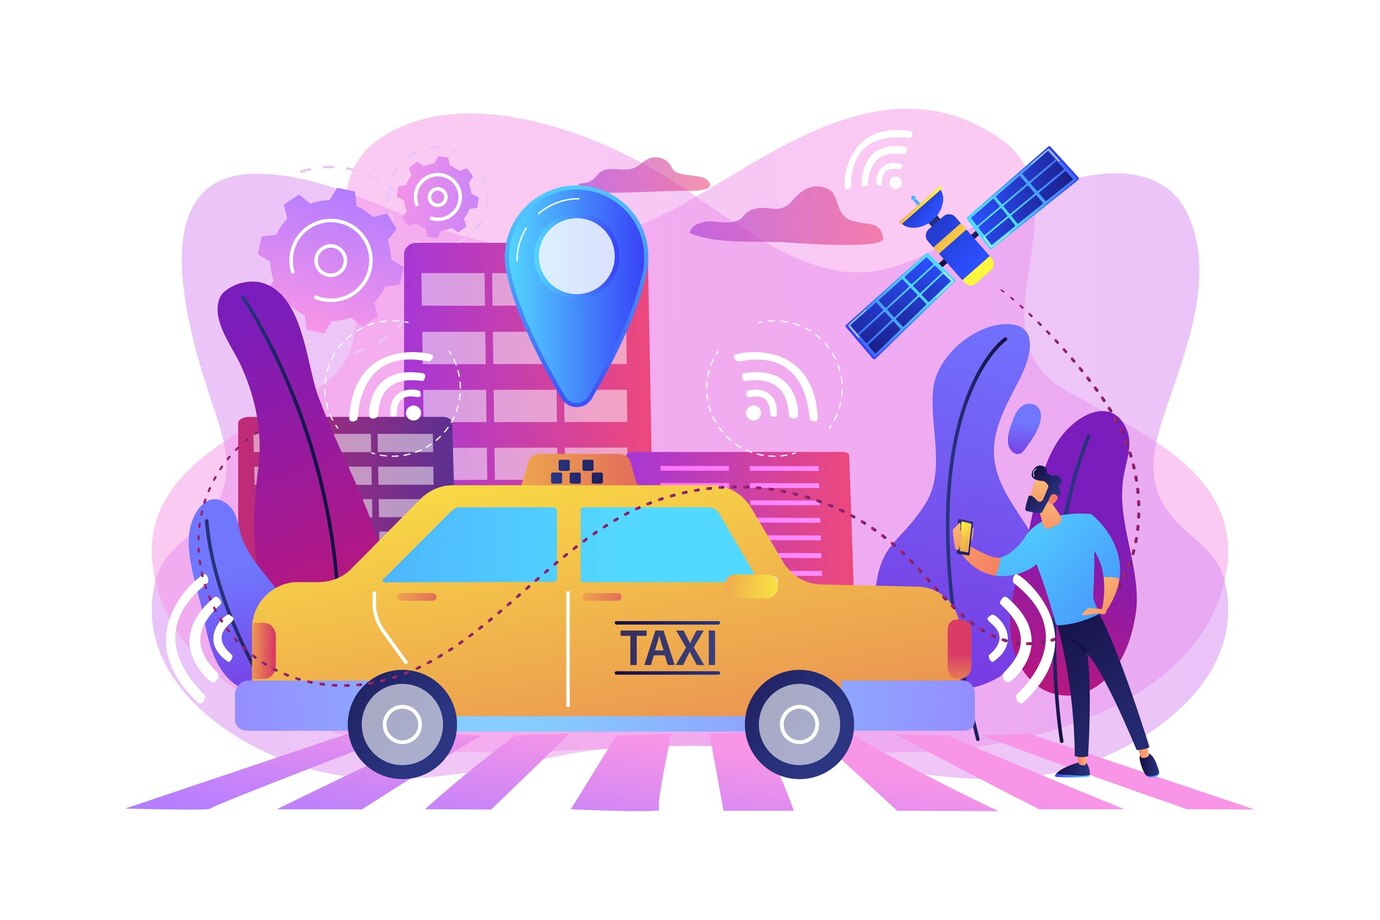 Businessman With Smartphone Taking Driverless Taxi With Sensors Location Pin Autonomous Taxi Self Driving Taxi Demand Car Service Concept Bright Vibrant Violet Isolated Illustration 335657 922